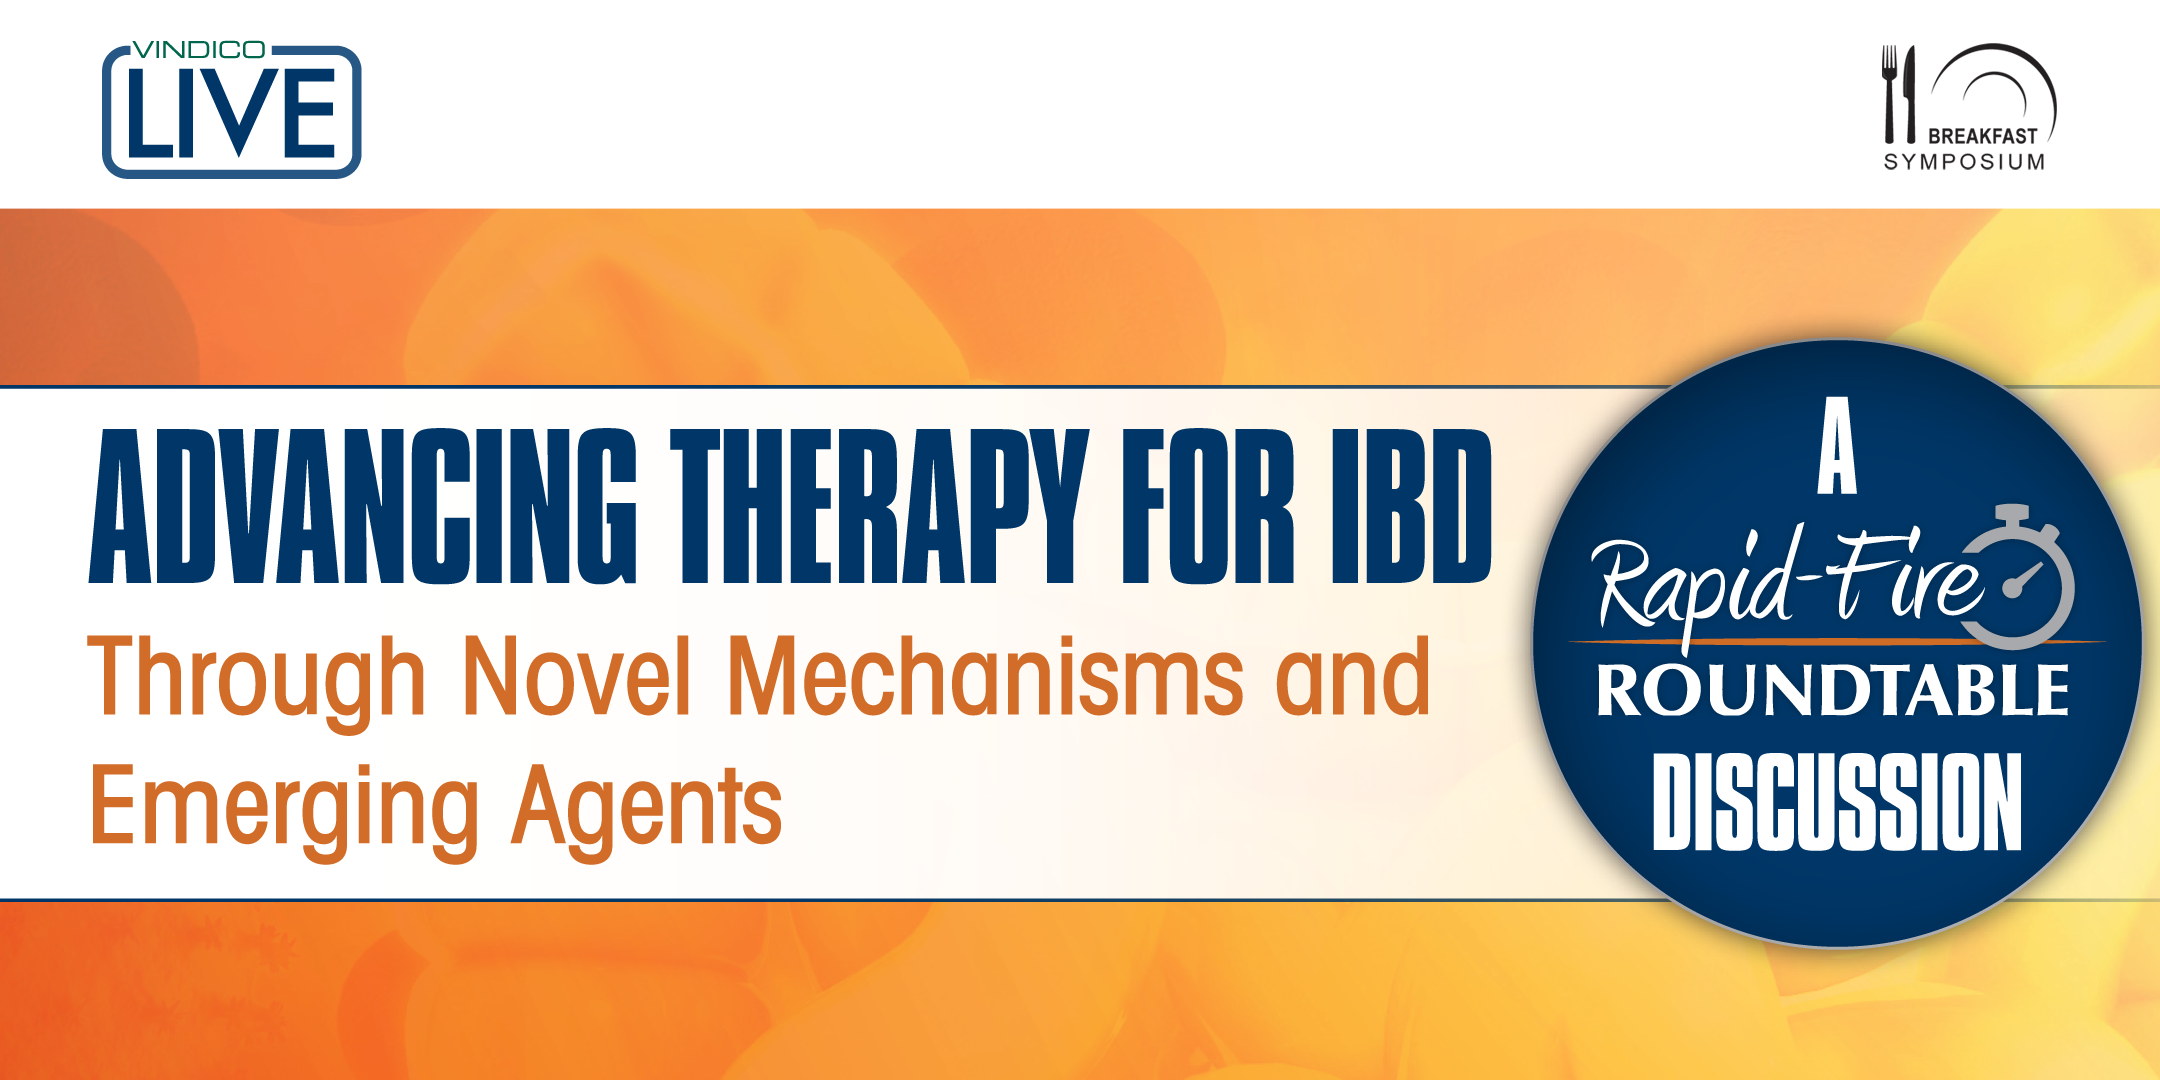 Advancing Therapy for Inflammatory Bowel Disease Through Novel Mechanisms and Emerging Agents: A Rapid-Fire Roundtable Discussion